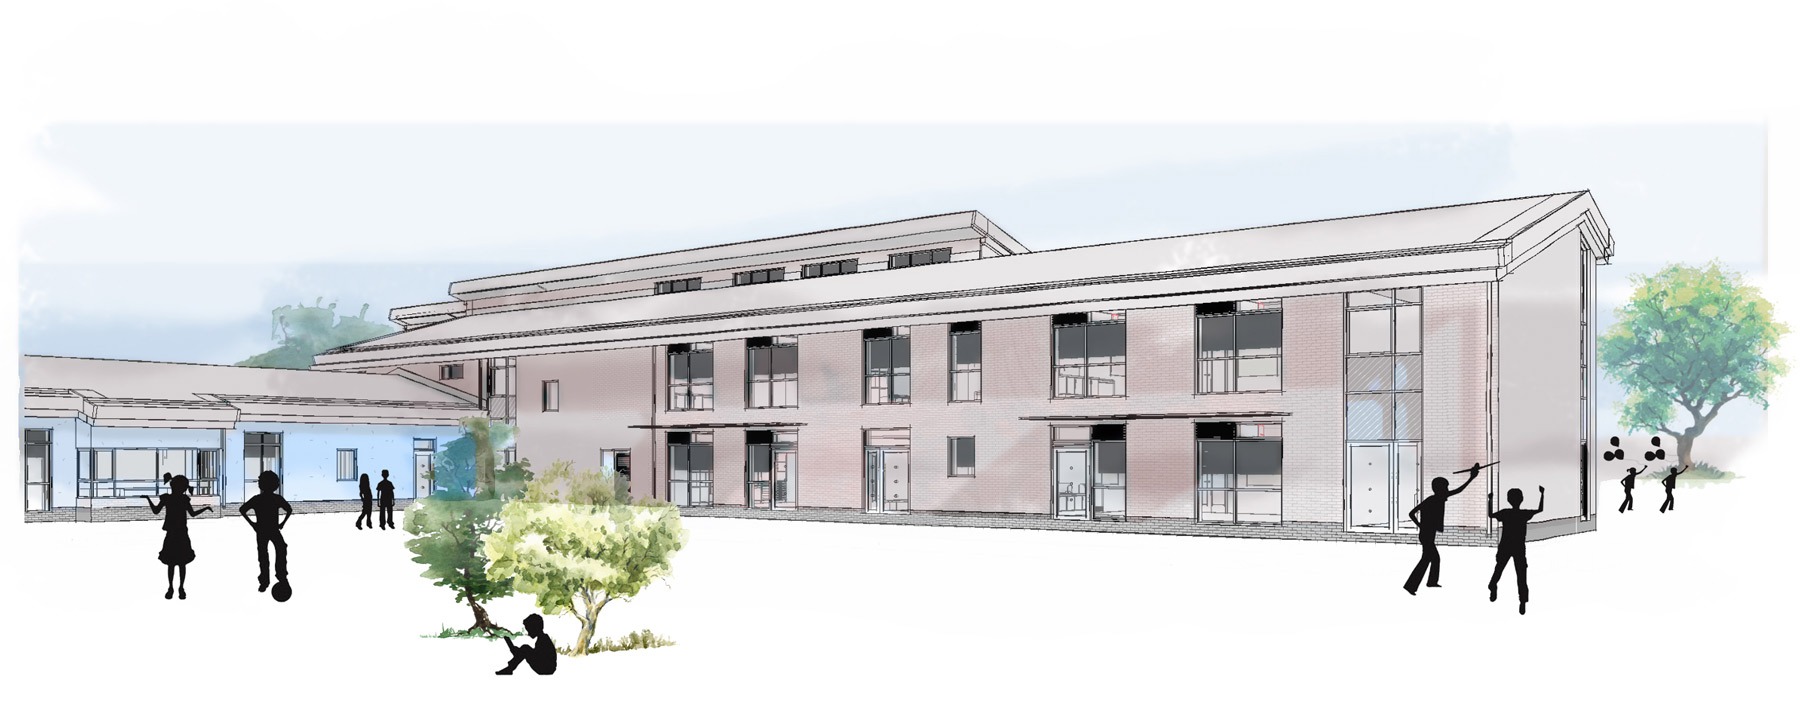 artist’s impression of the new school planned for Knaresborough